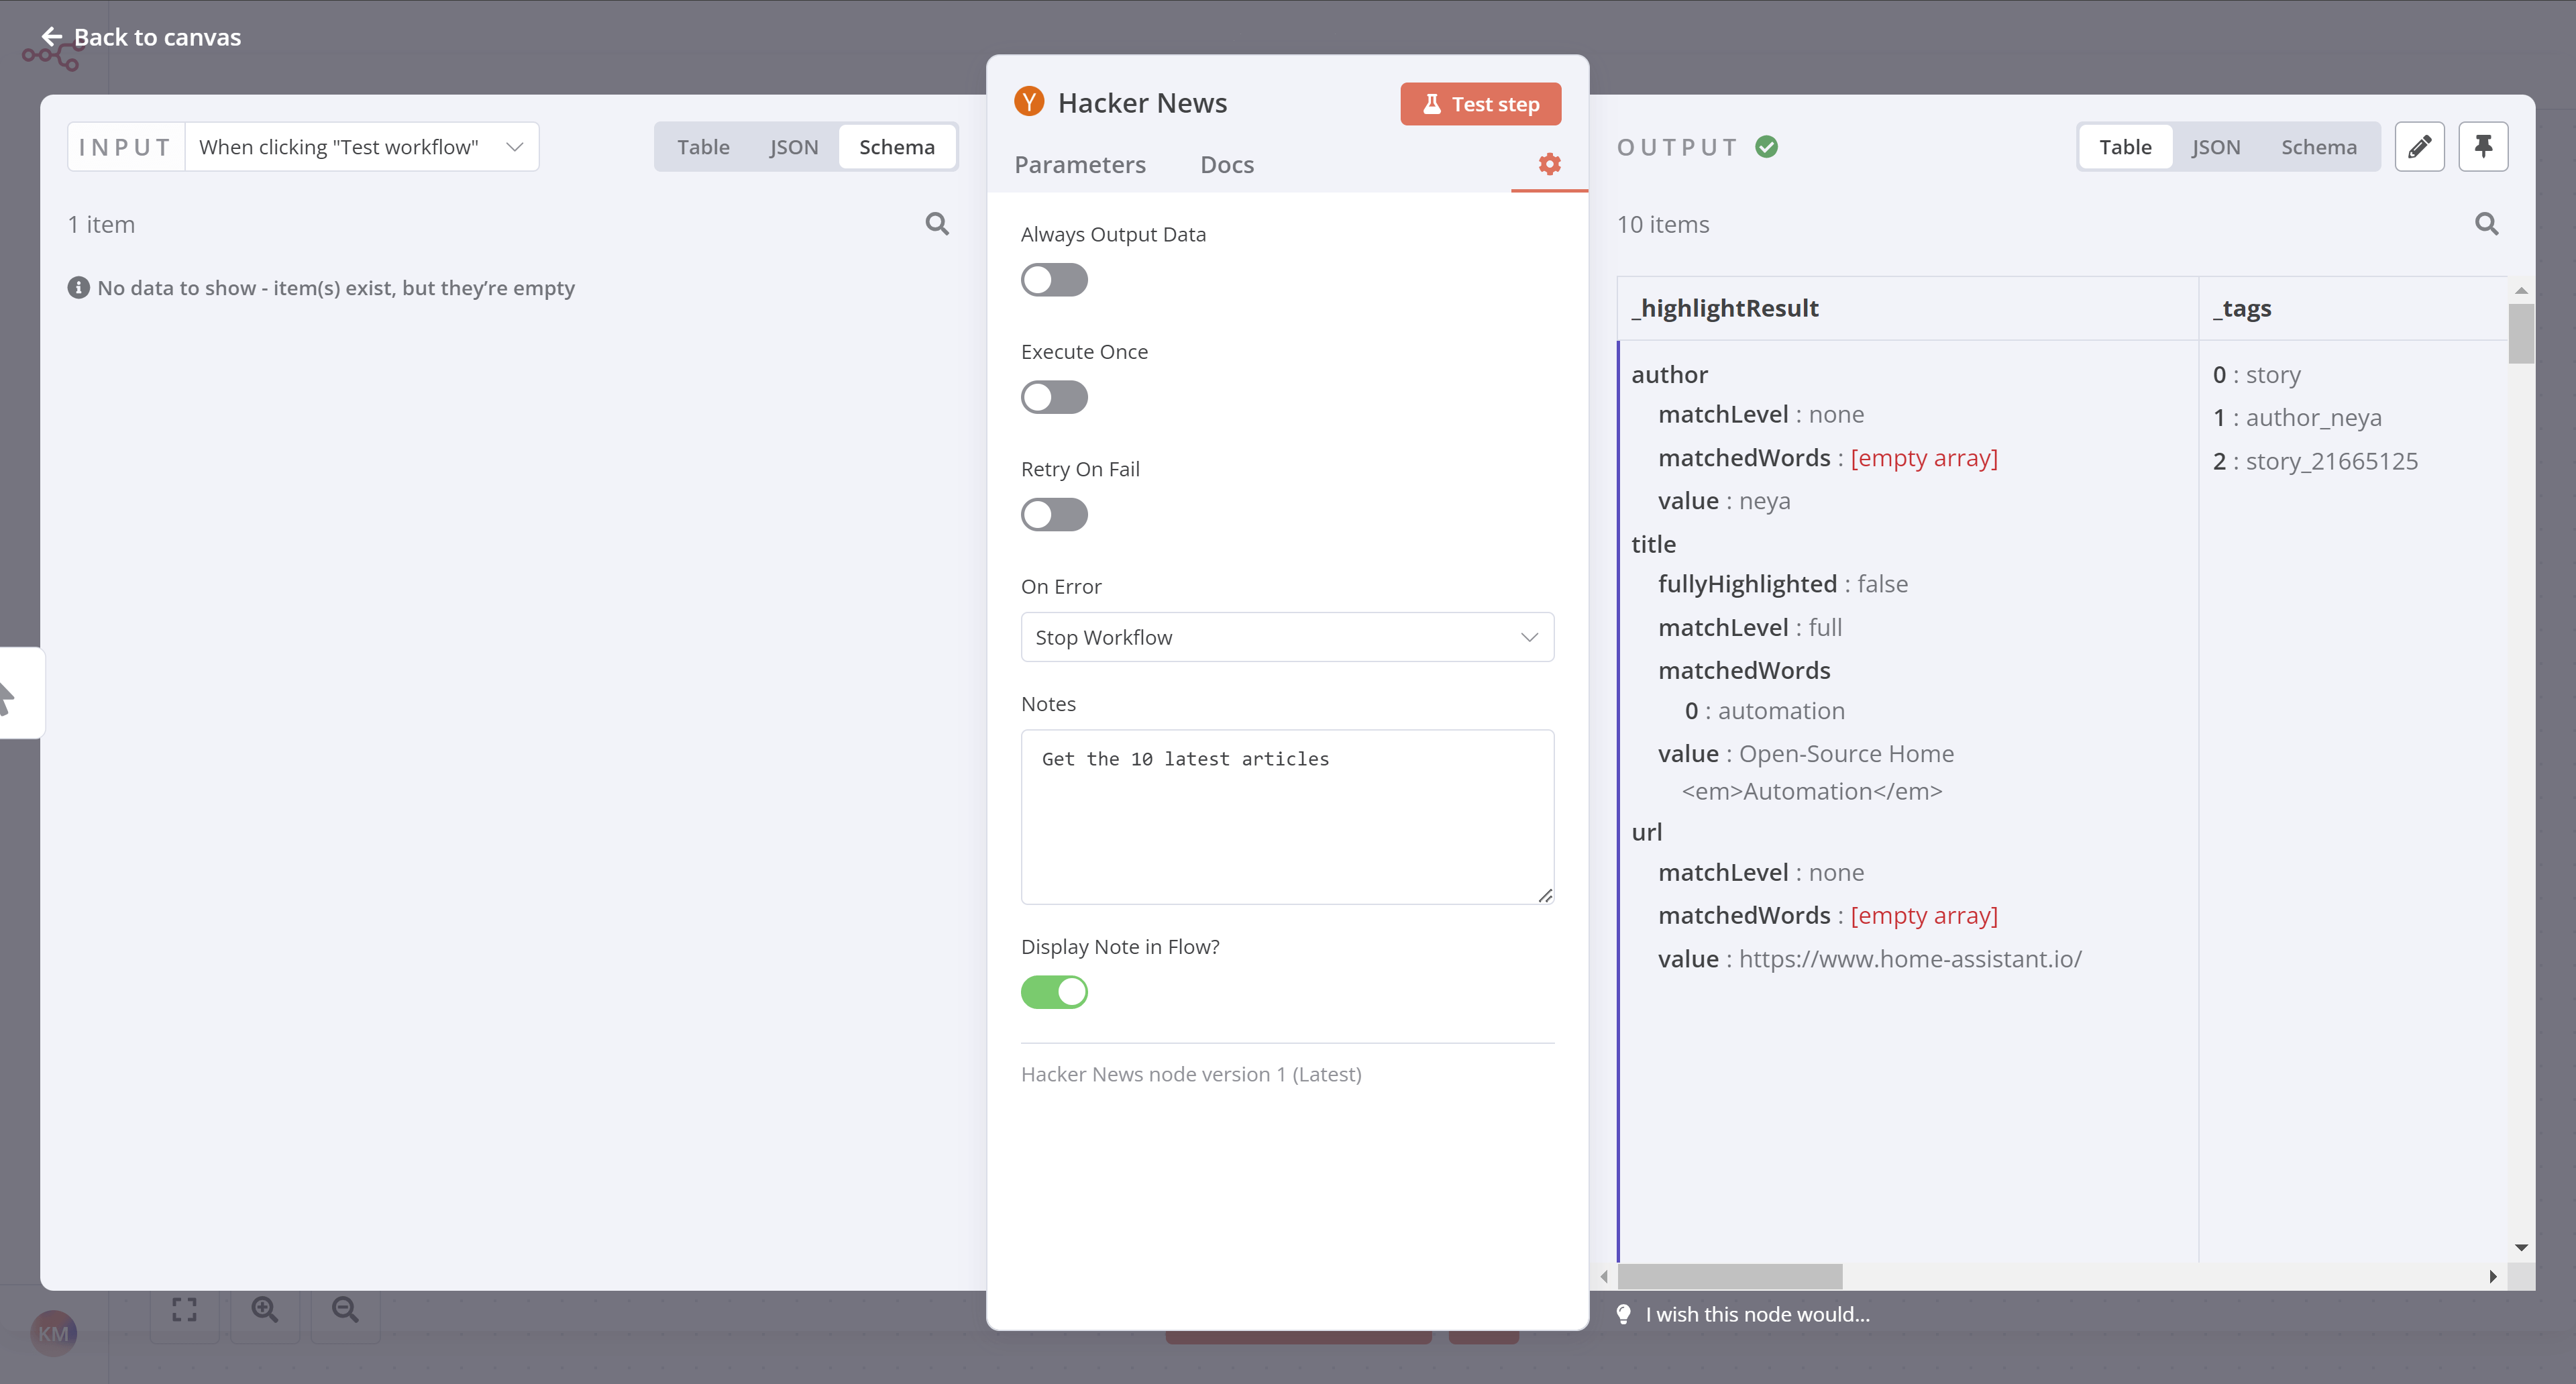 Results in Table view for the Hacker News node